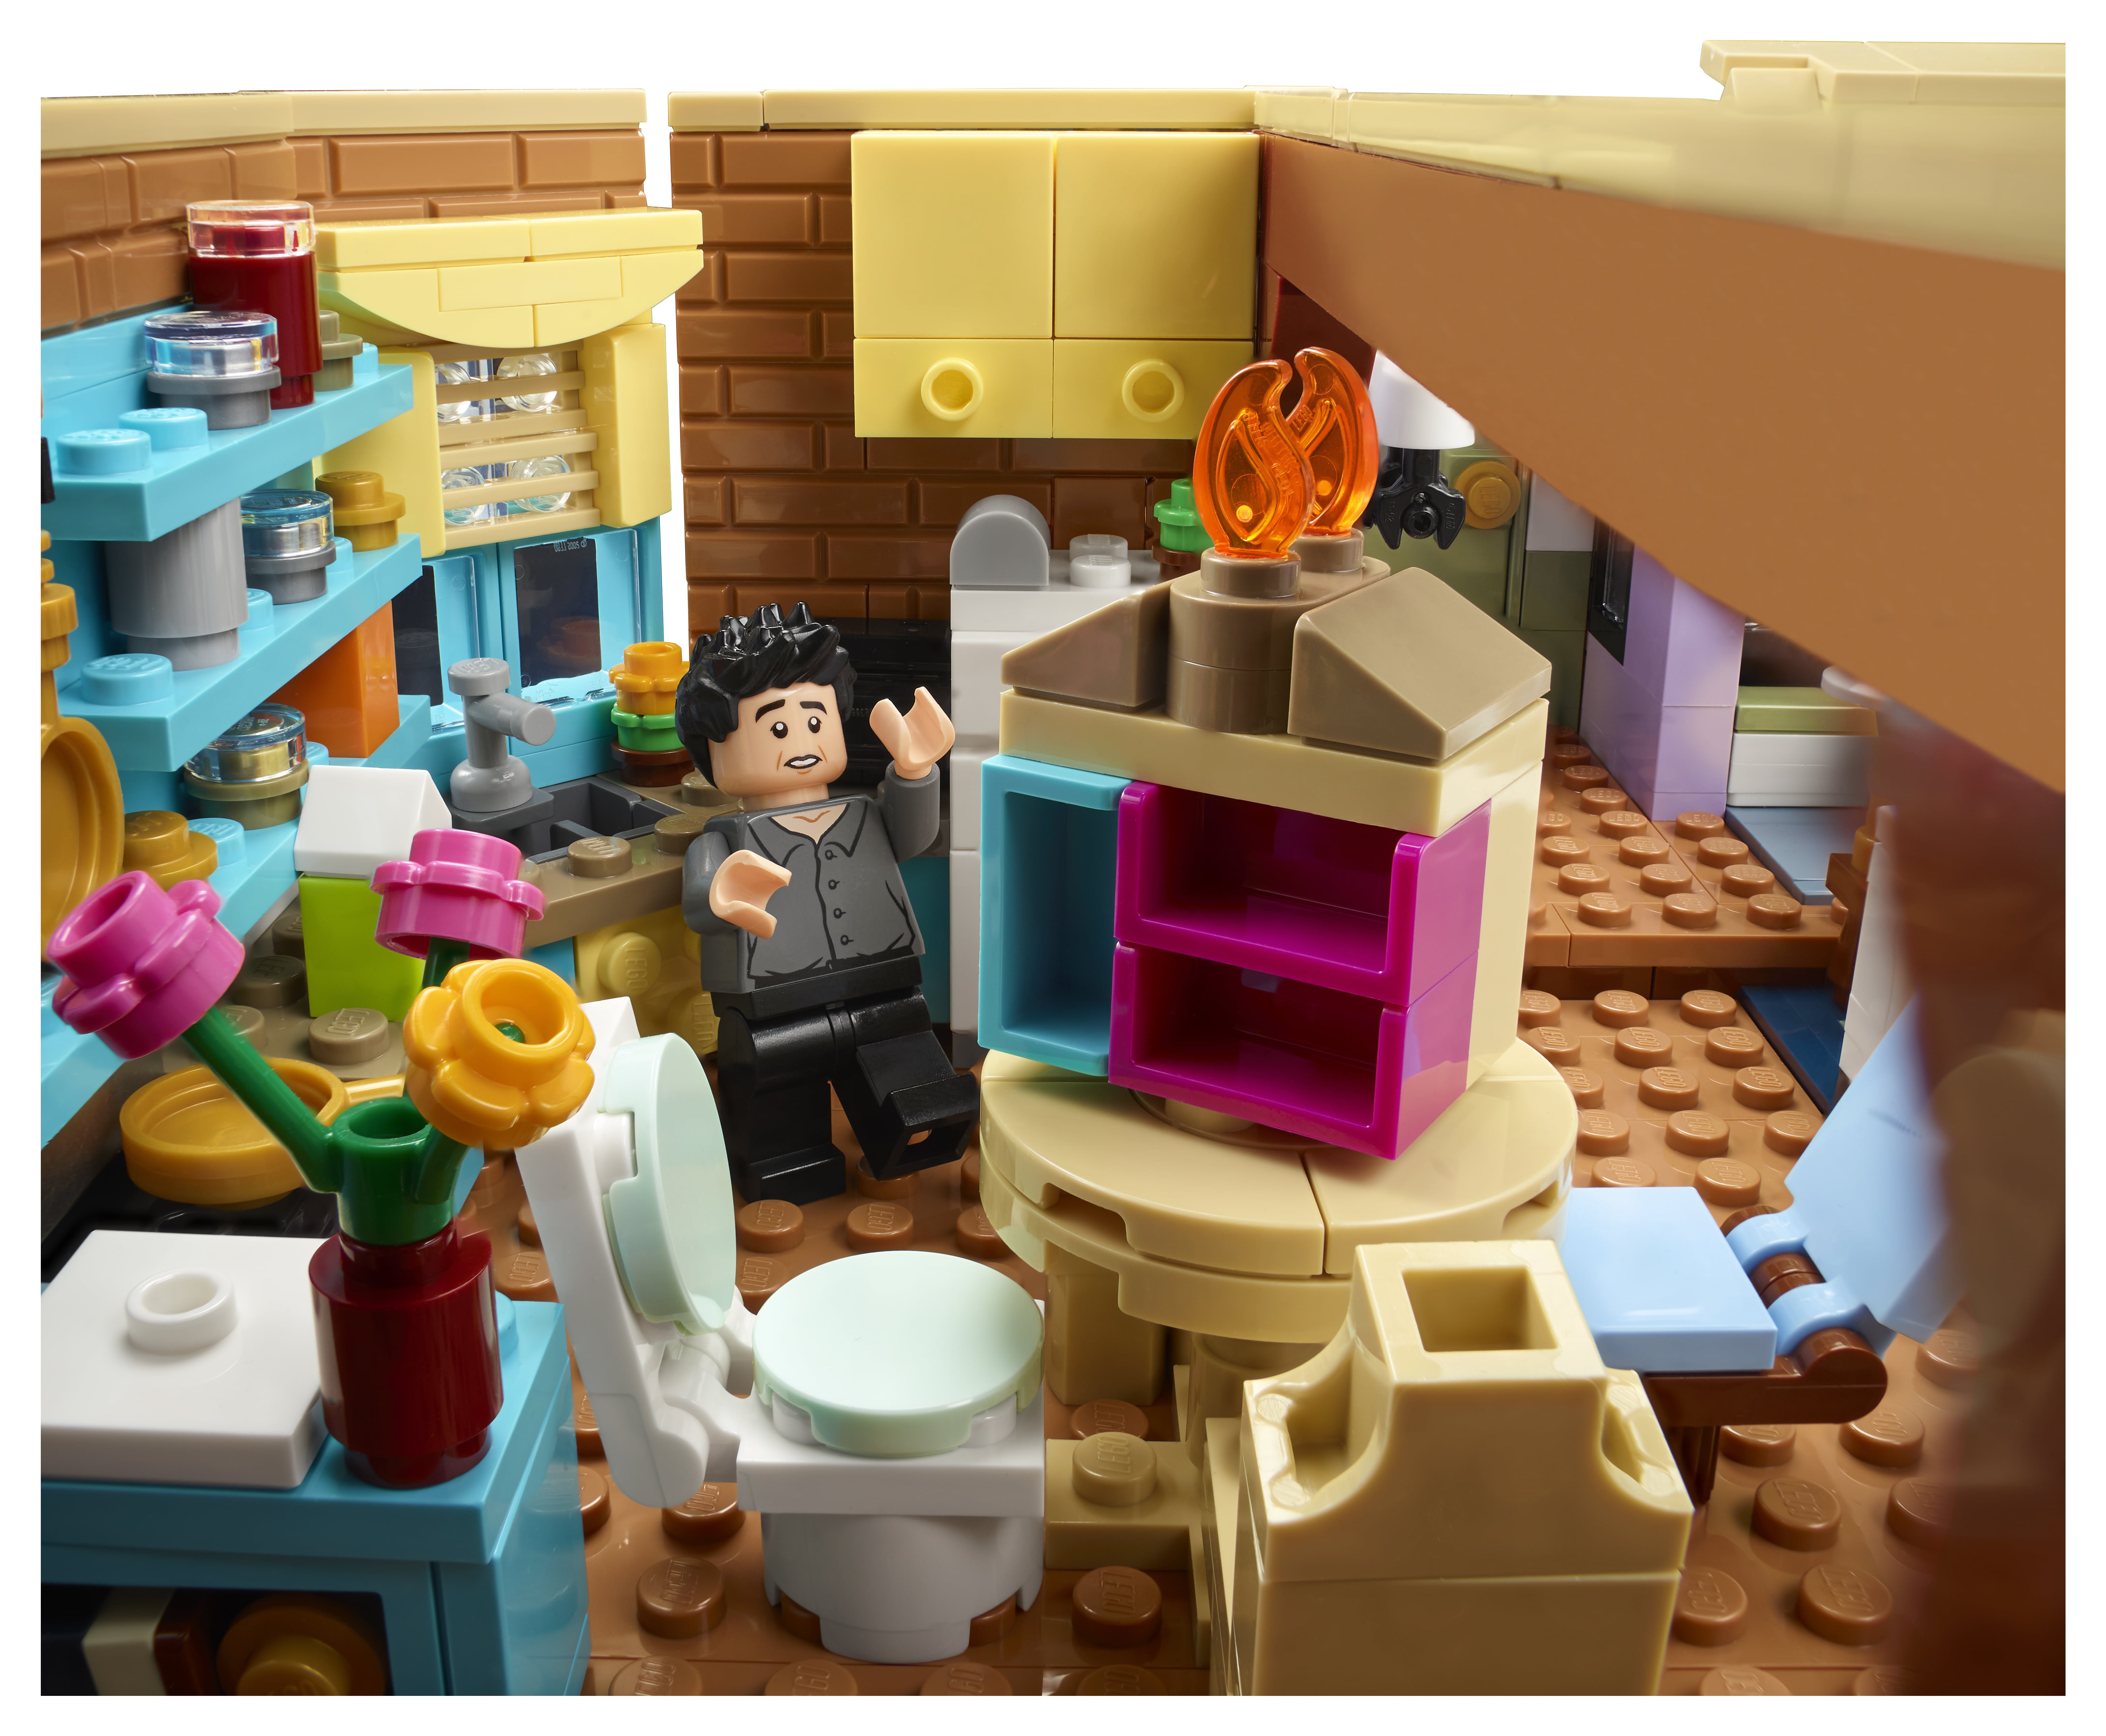 See Photos of the Incredible Lego Friends Apartments Set